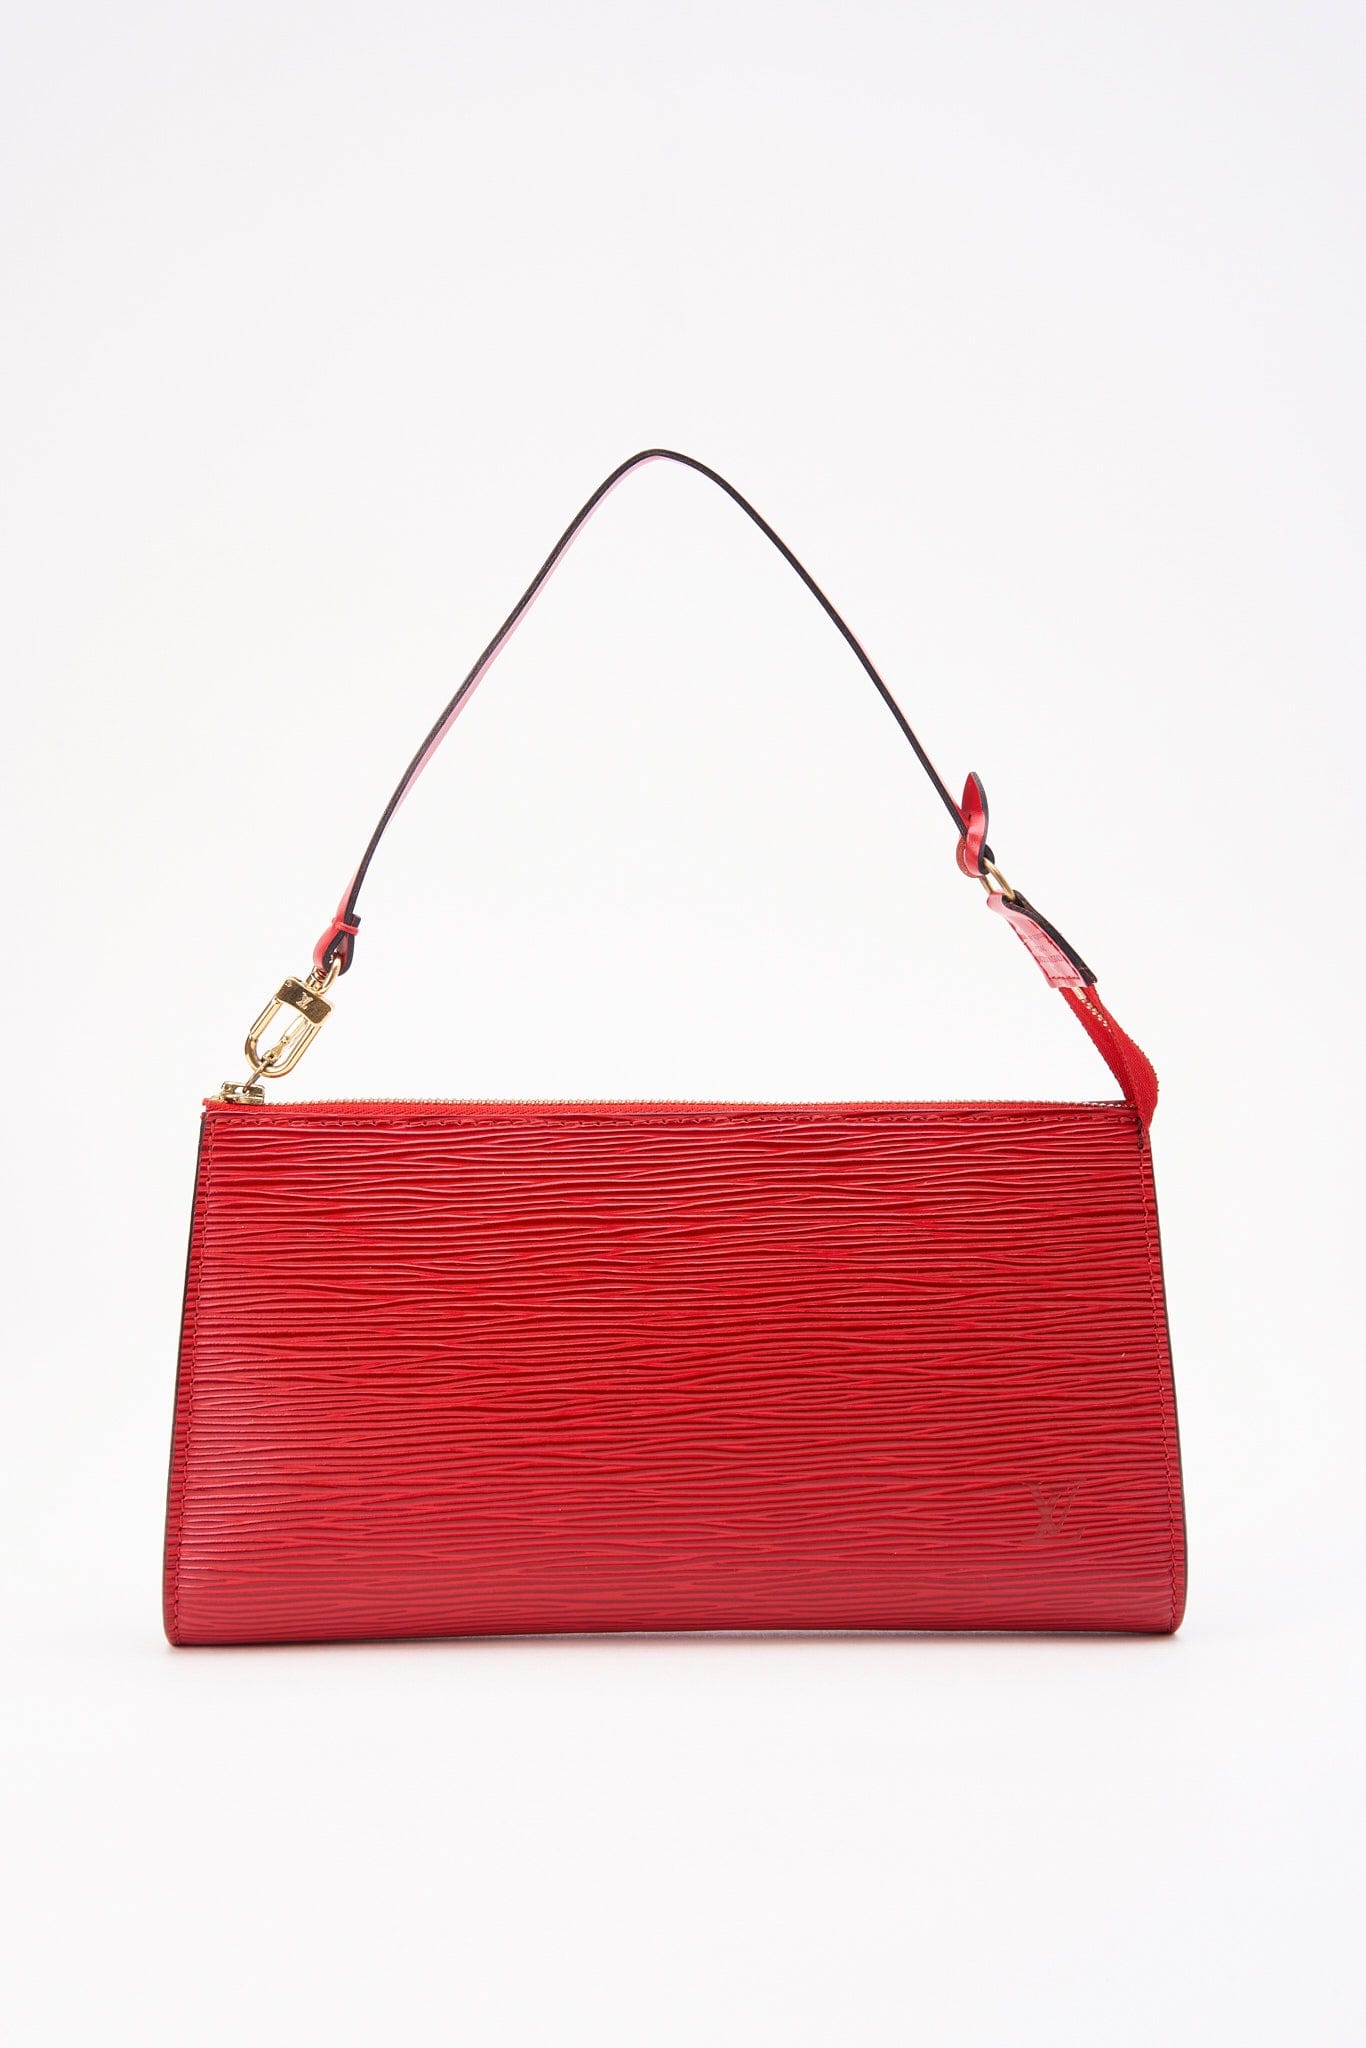 Louis Vuitton Pochette Bag in Red Epi leather